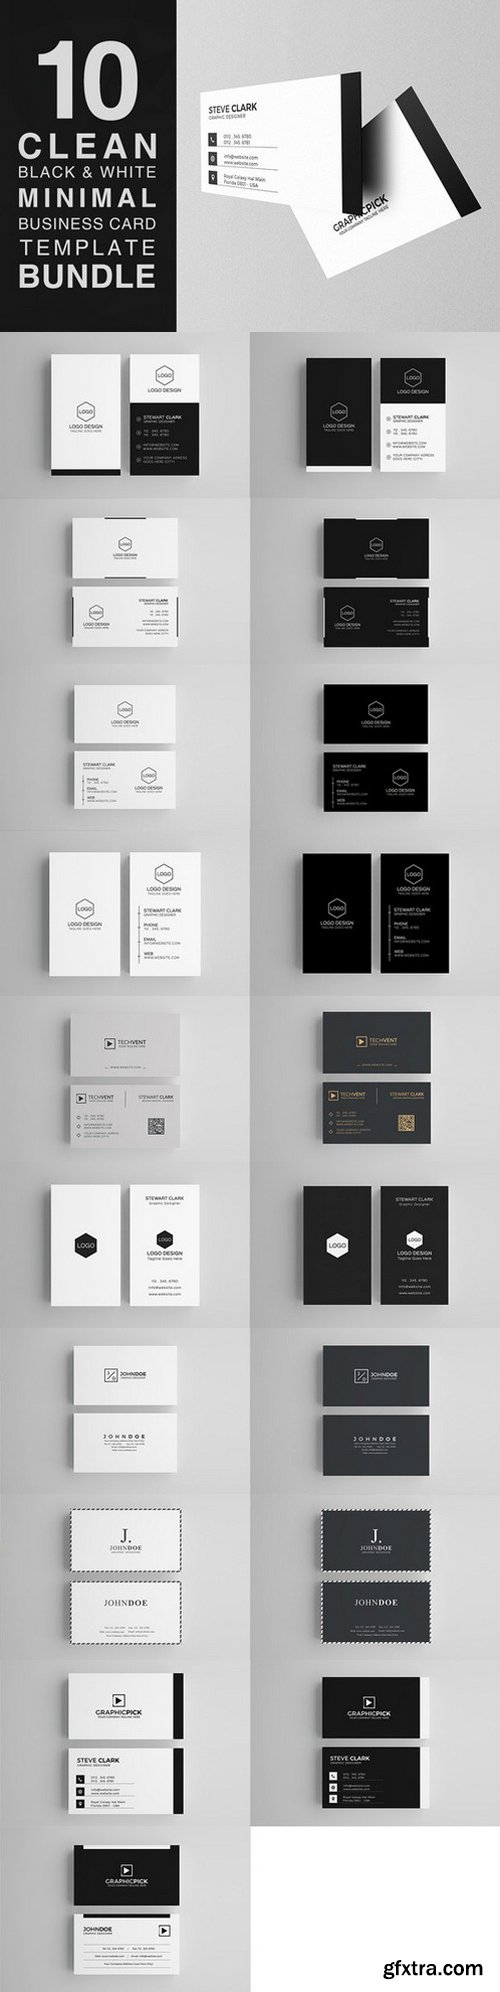 10 Clean Minimal Business Cards